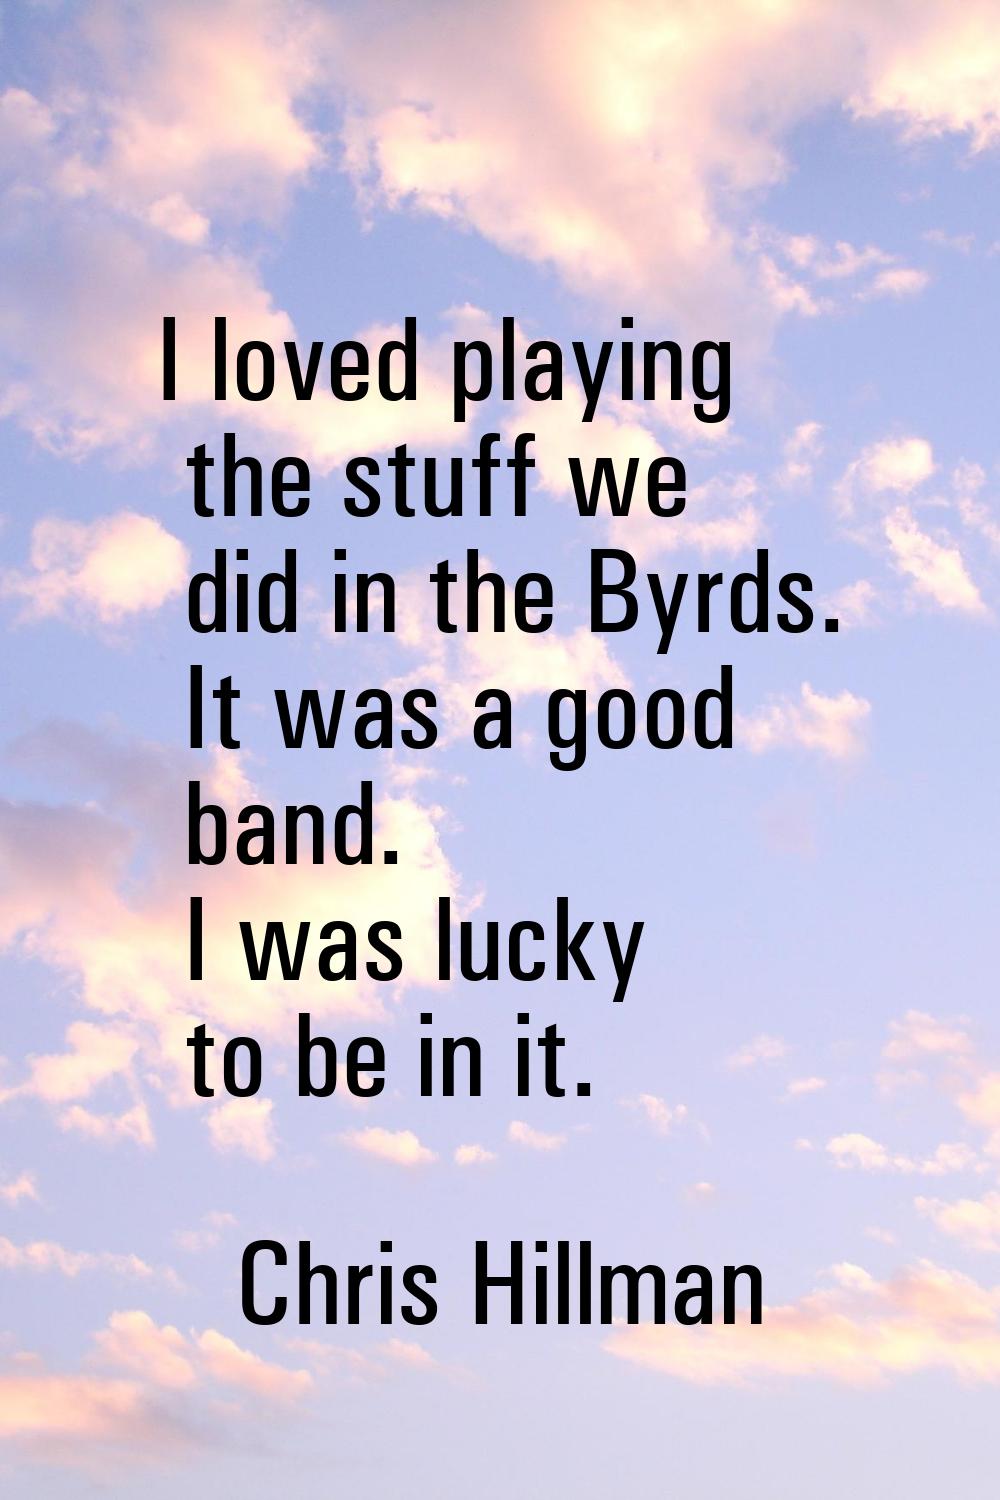 I loved playing the stuff we did in the Byrds. It was a good band. I was lucky to be in it.